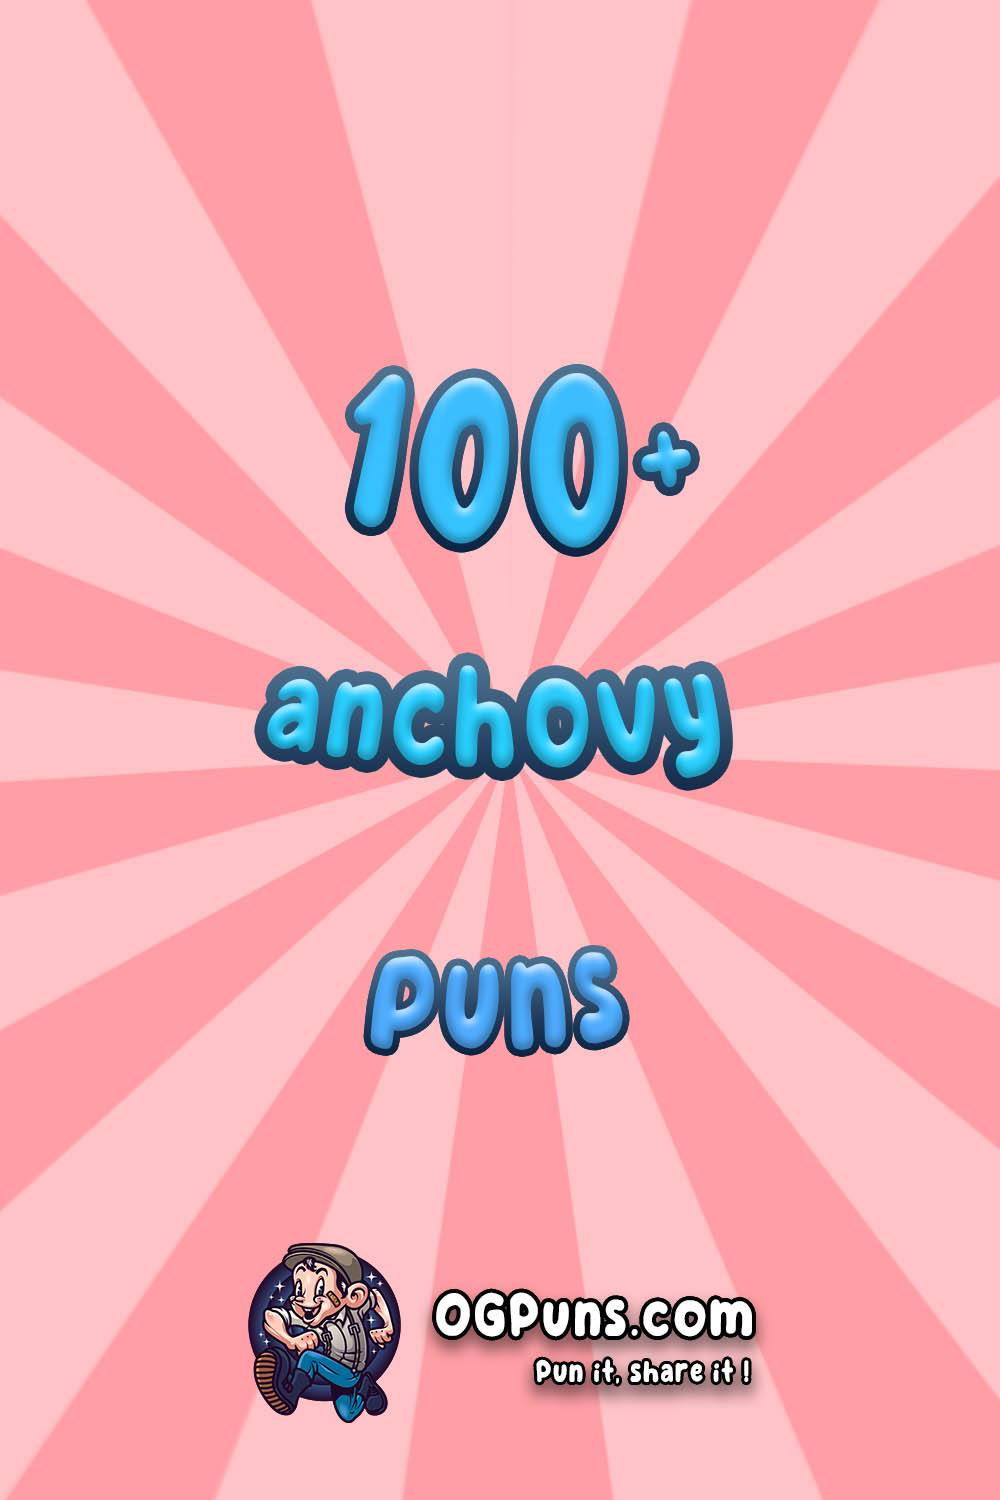 Anchovy puns Image for Pinterest